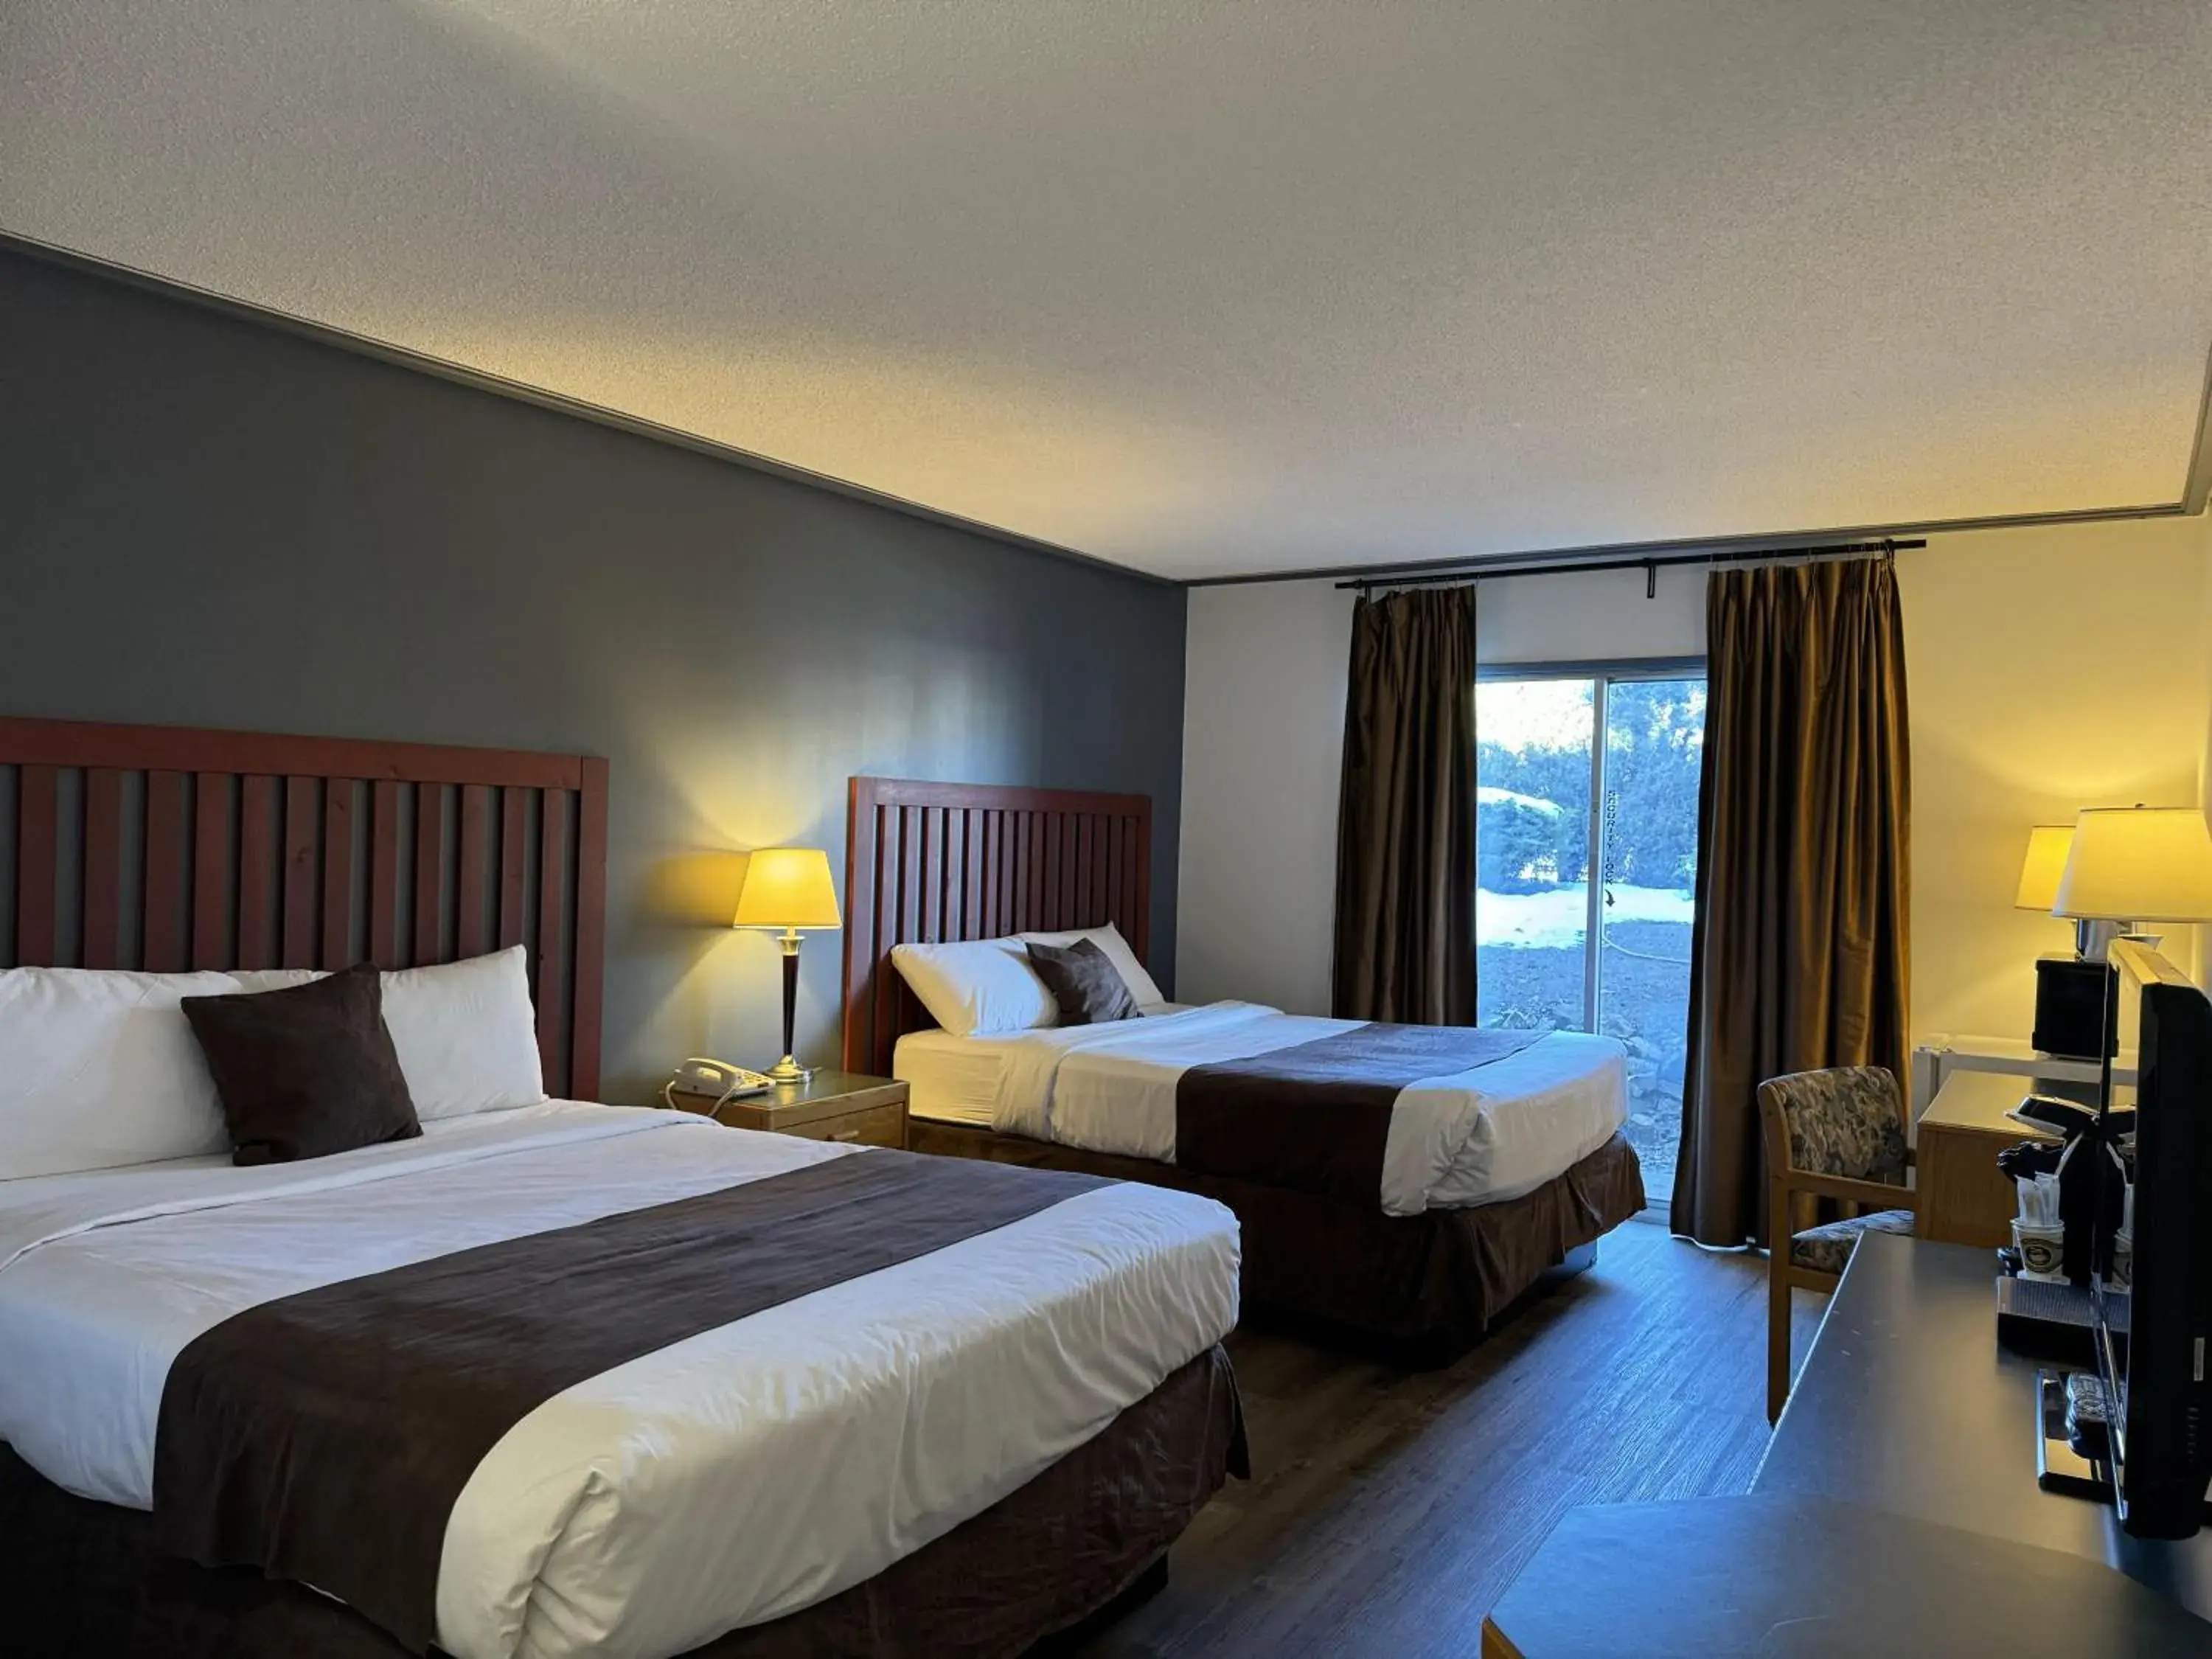 Bed in DIVYA SUTRA Riviera Plaza and Conference Centre, Vernon, BC